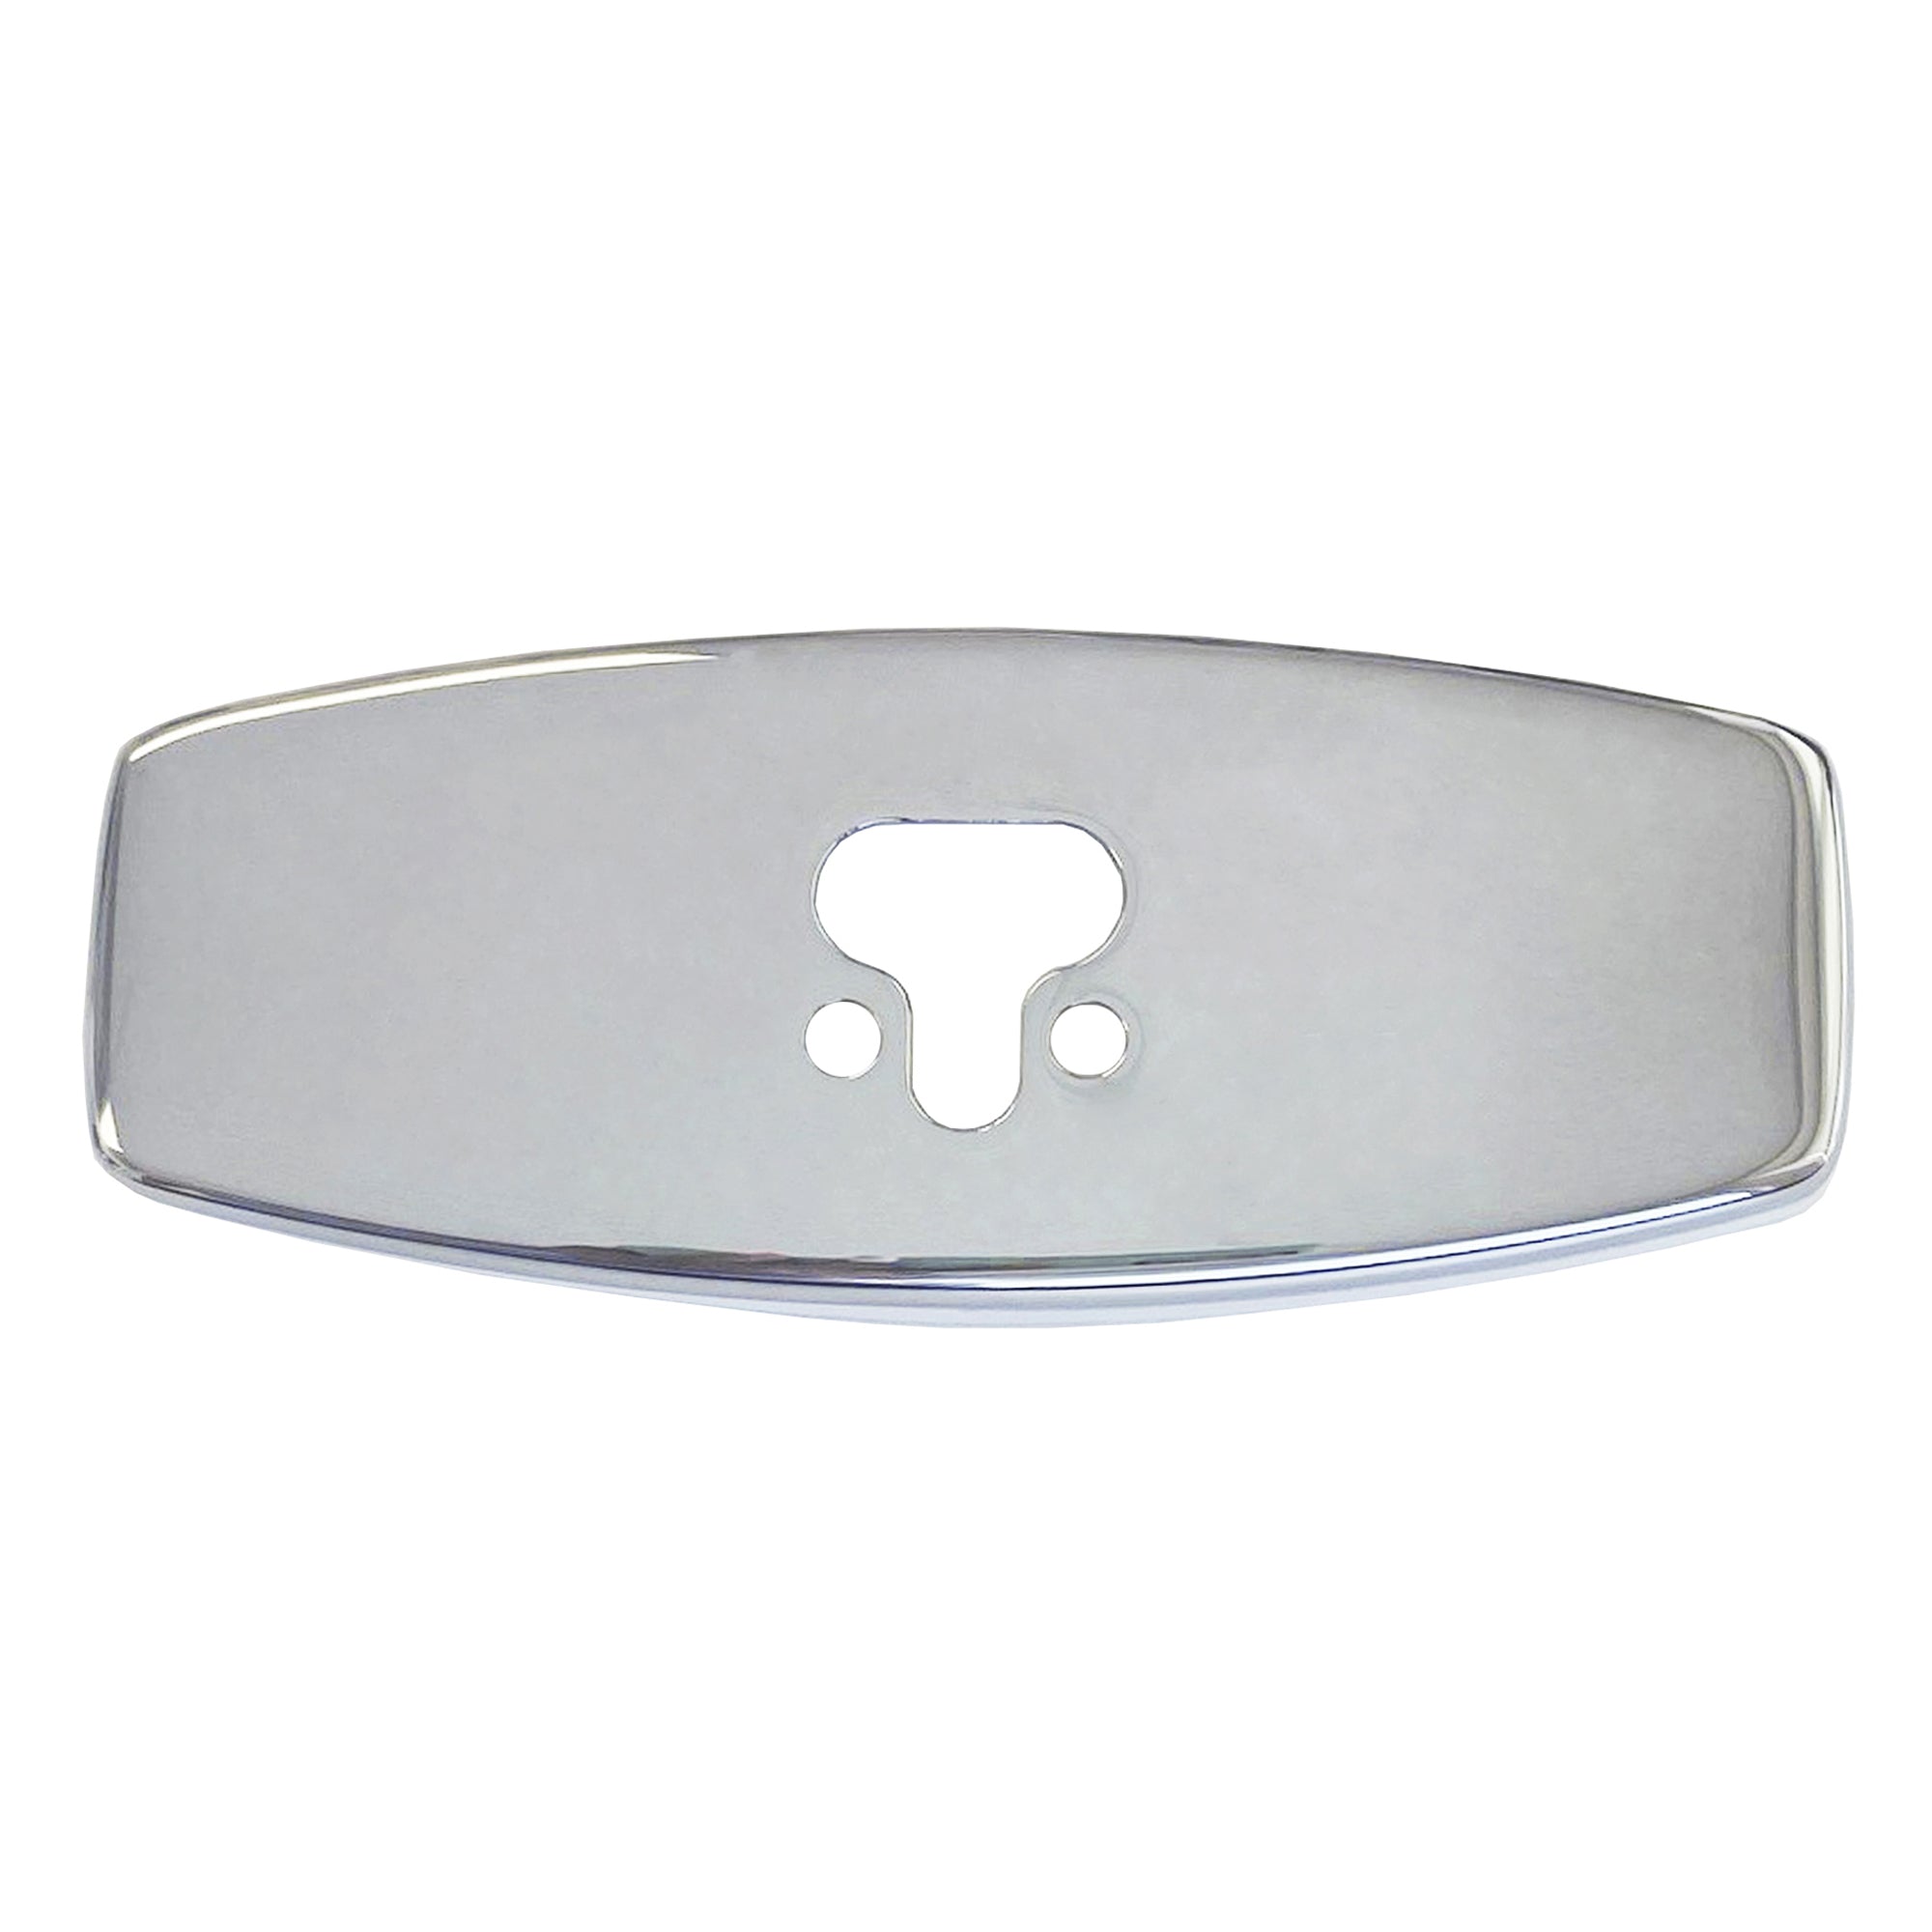 Deck plate in stainless steel